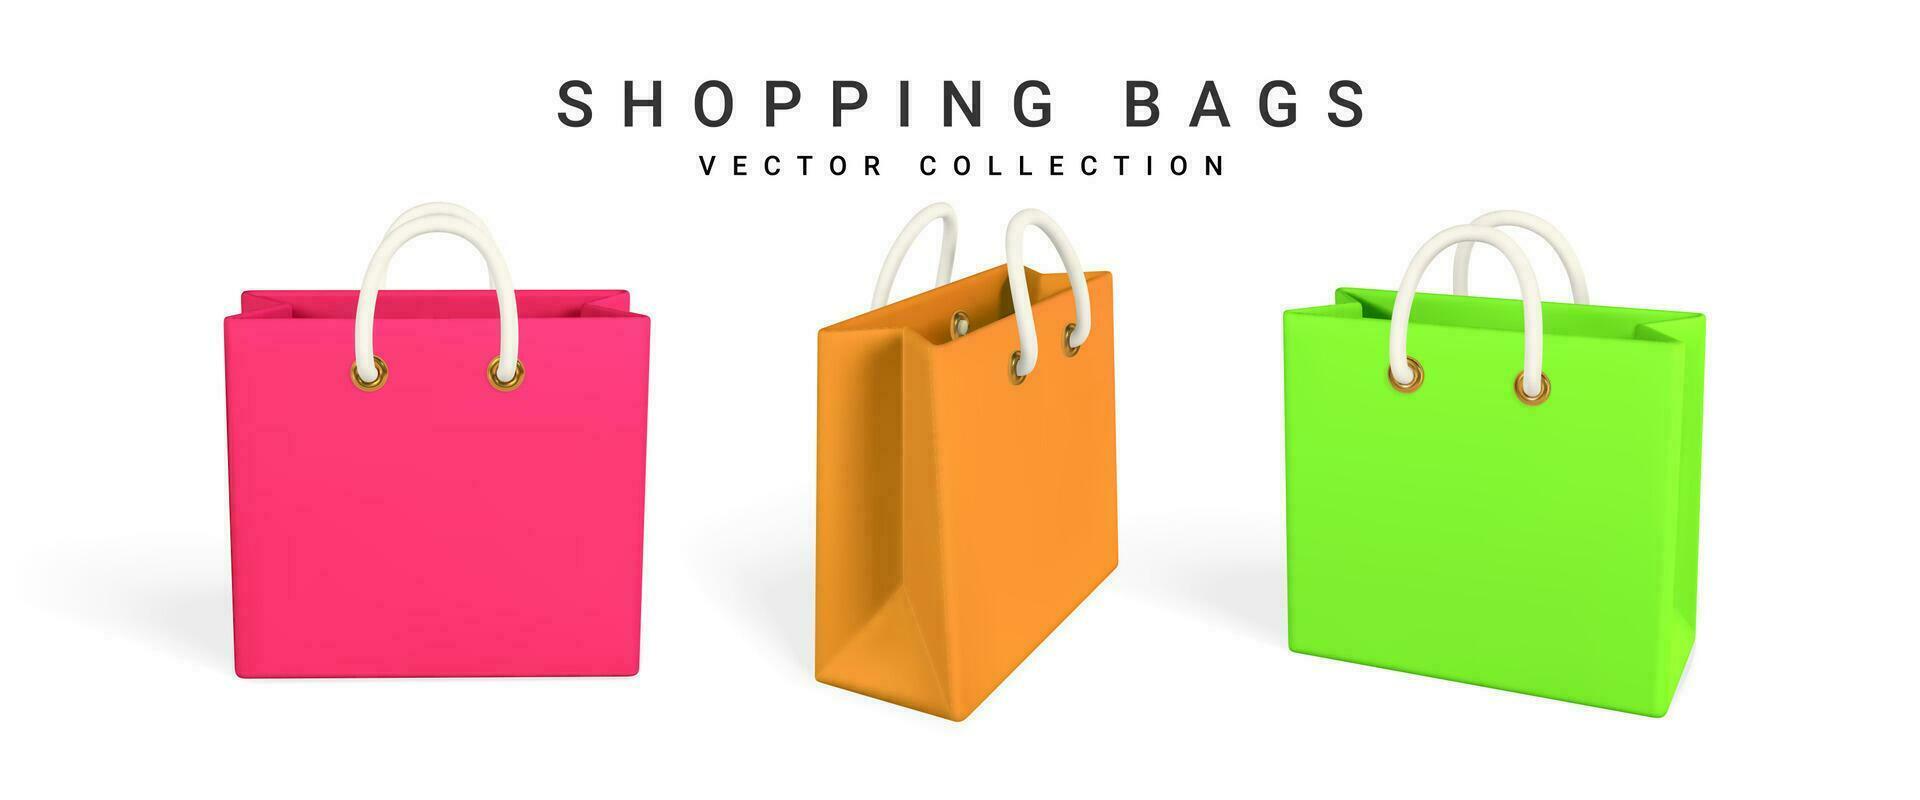 3d empty shopping bags on a white background. Shopping concept. Vector illustration